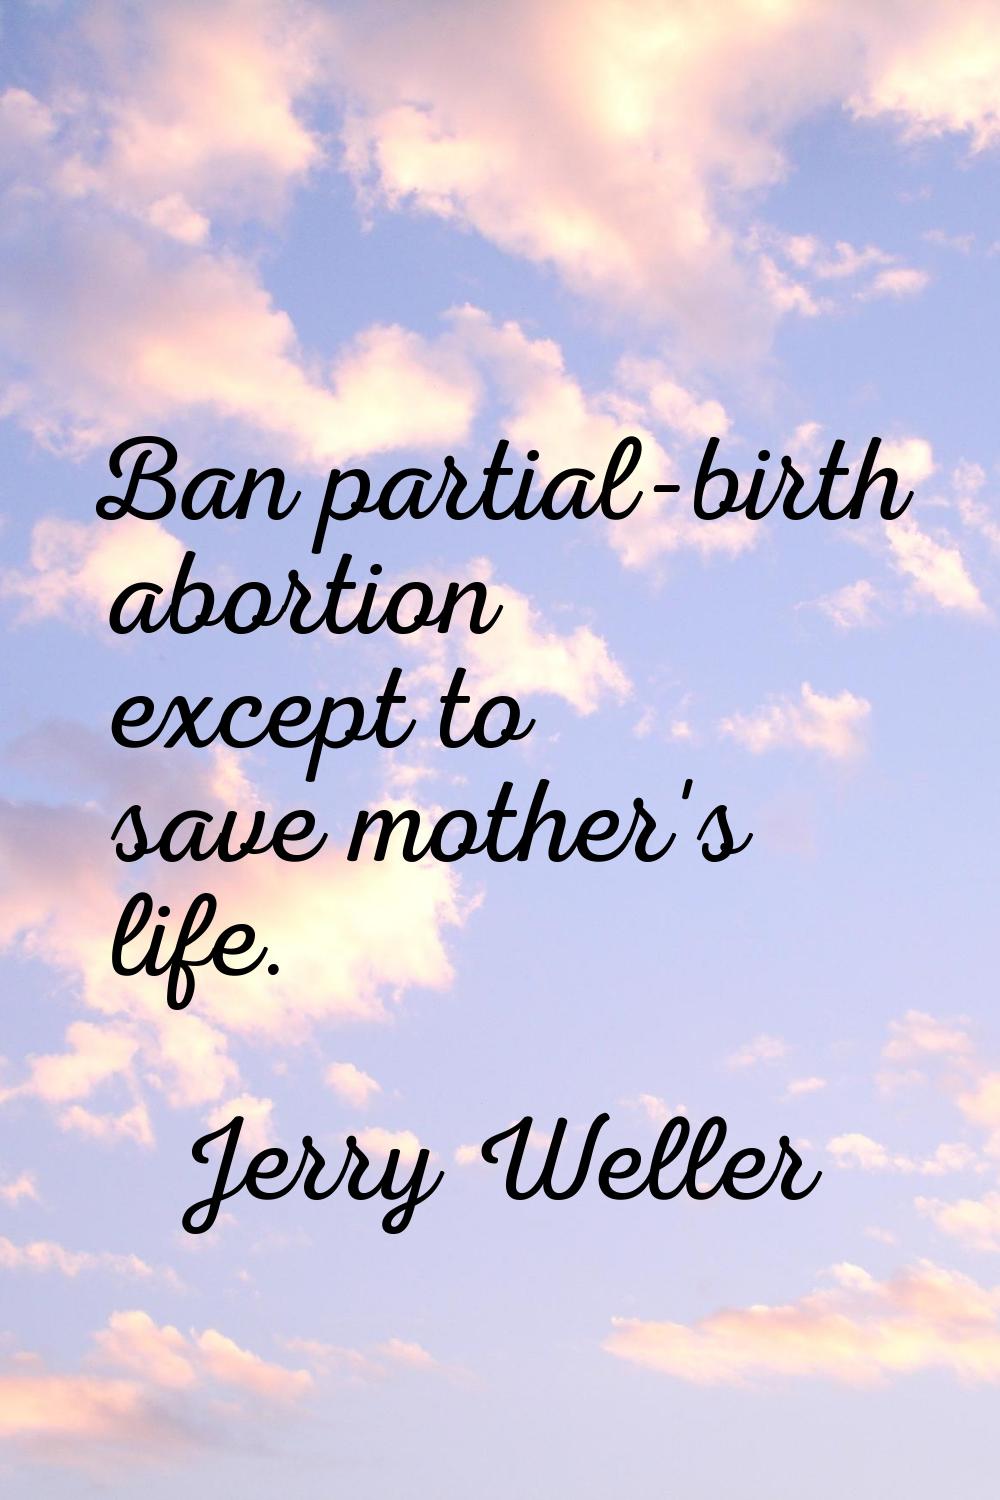 Ban partial-birth abortion except to save mother's life.